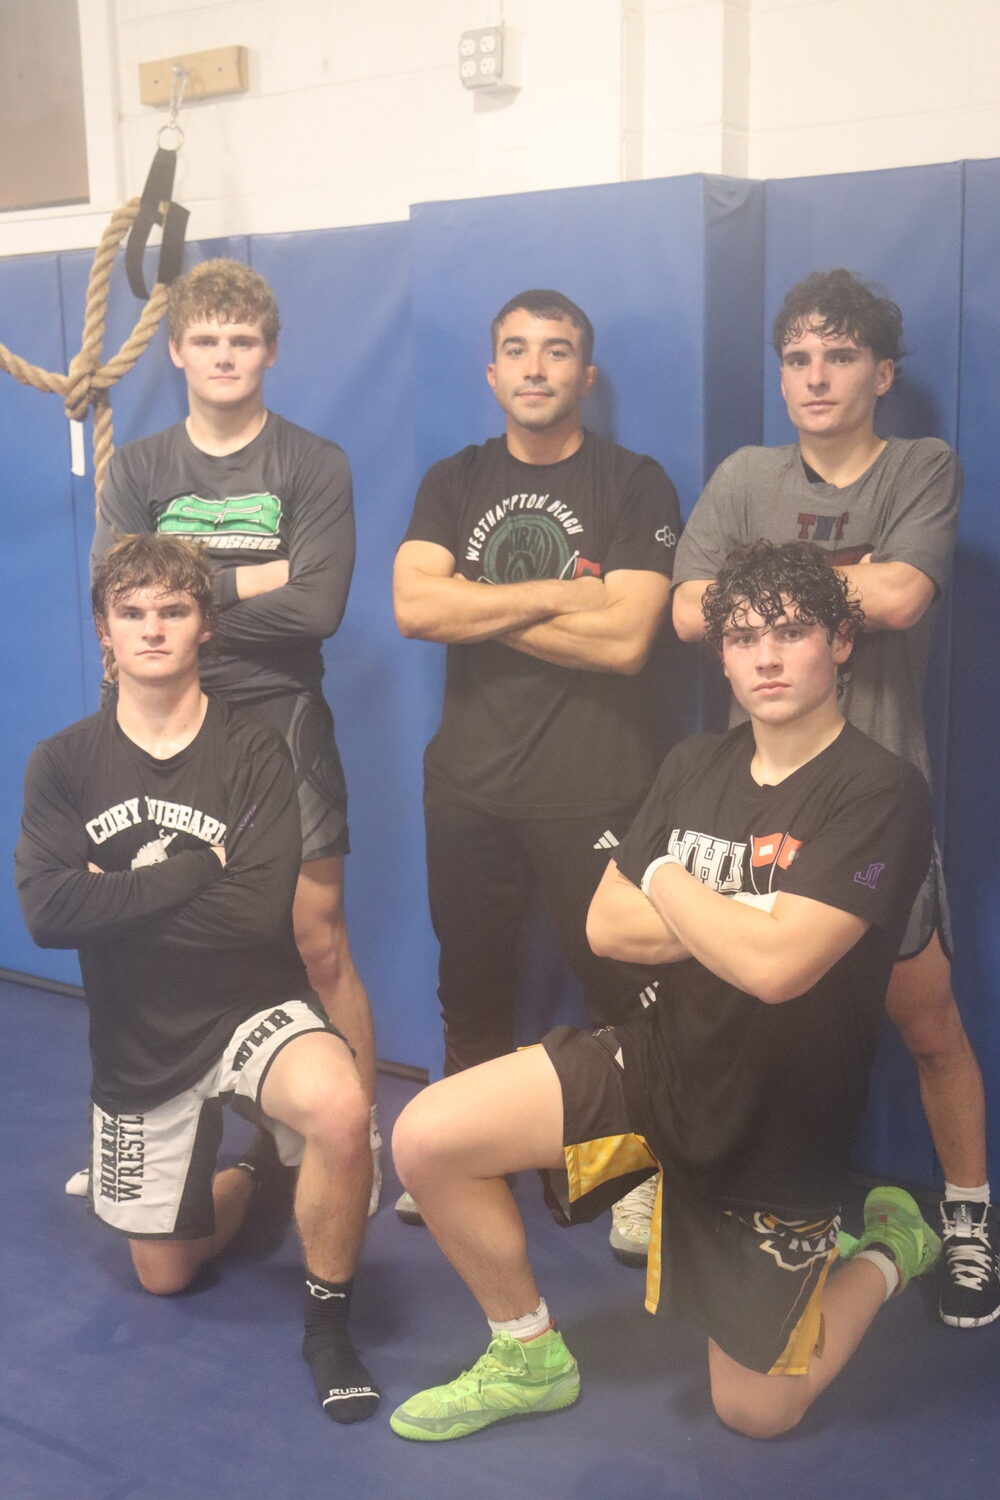 Top row, from left: Connor Rodgers, head coach Jakob Restrepo, and Nate Brandi. Bottom row, from left: Bobby Stabile and Joey Carasiti. The four Hurricanes are this year's captains, and Restrepo, 26, is in his first year as head coach of the team. CAILIN RILEY